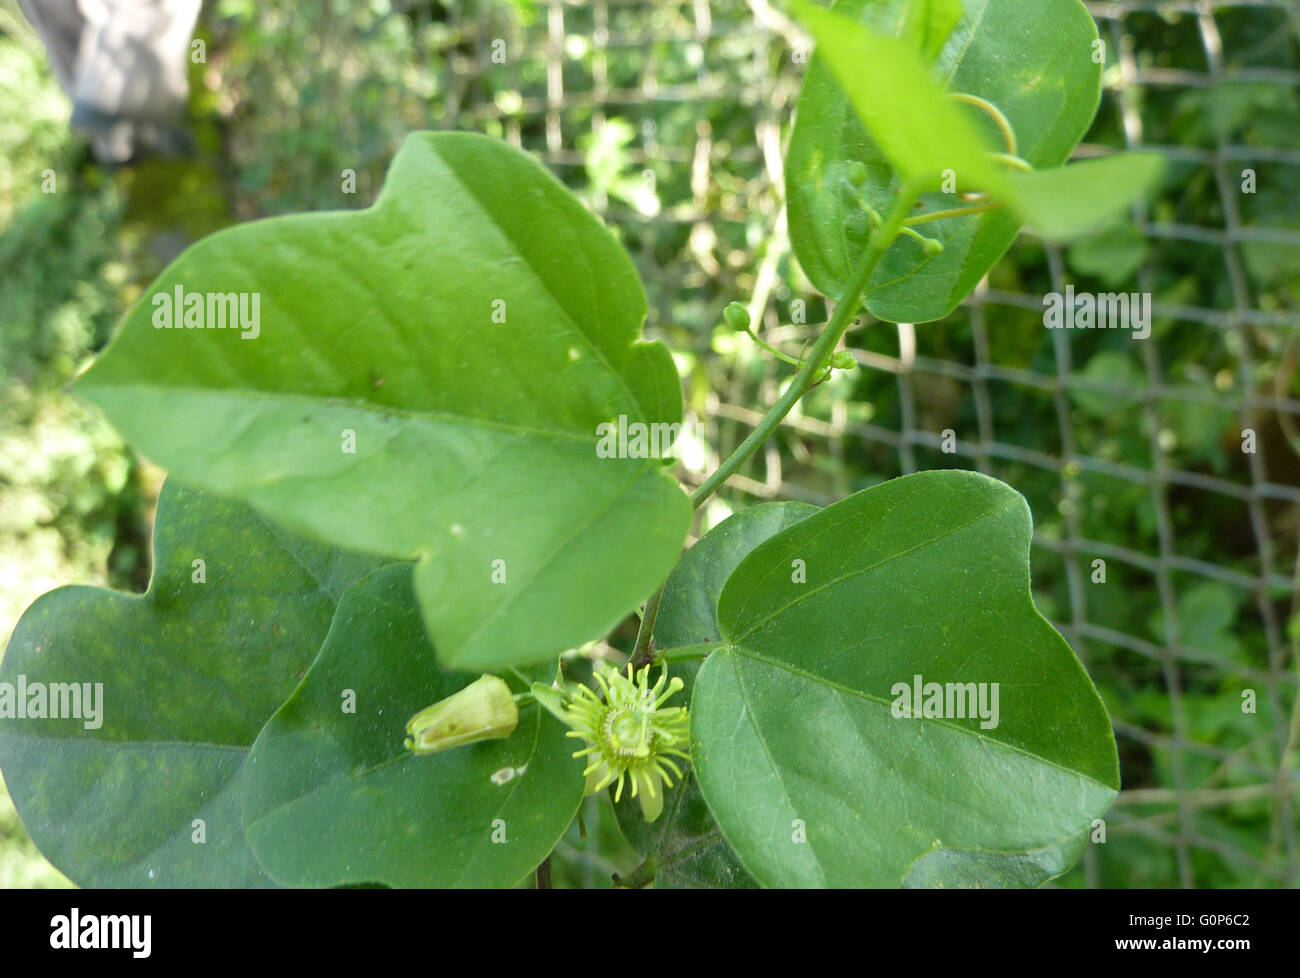 Passiflora suberosa,  corkystem passionflower, Herbaceous vine with three lobed leaves and small green flowers lacking petals Stock Photo